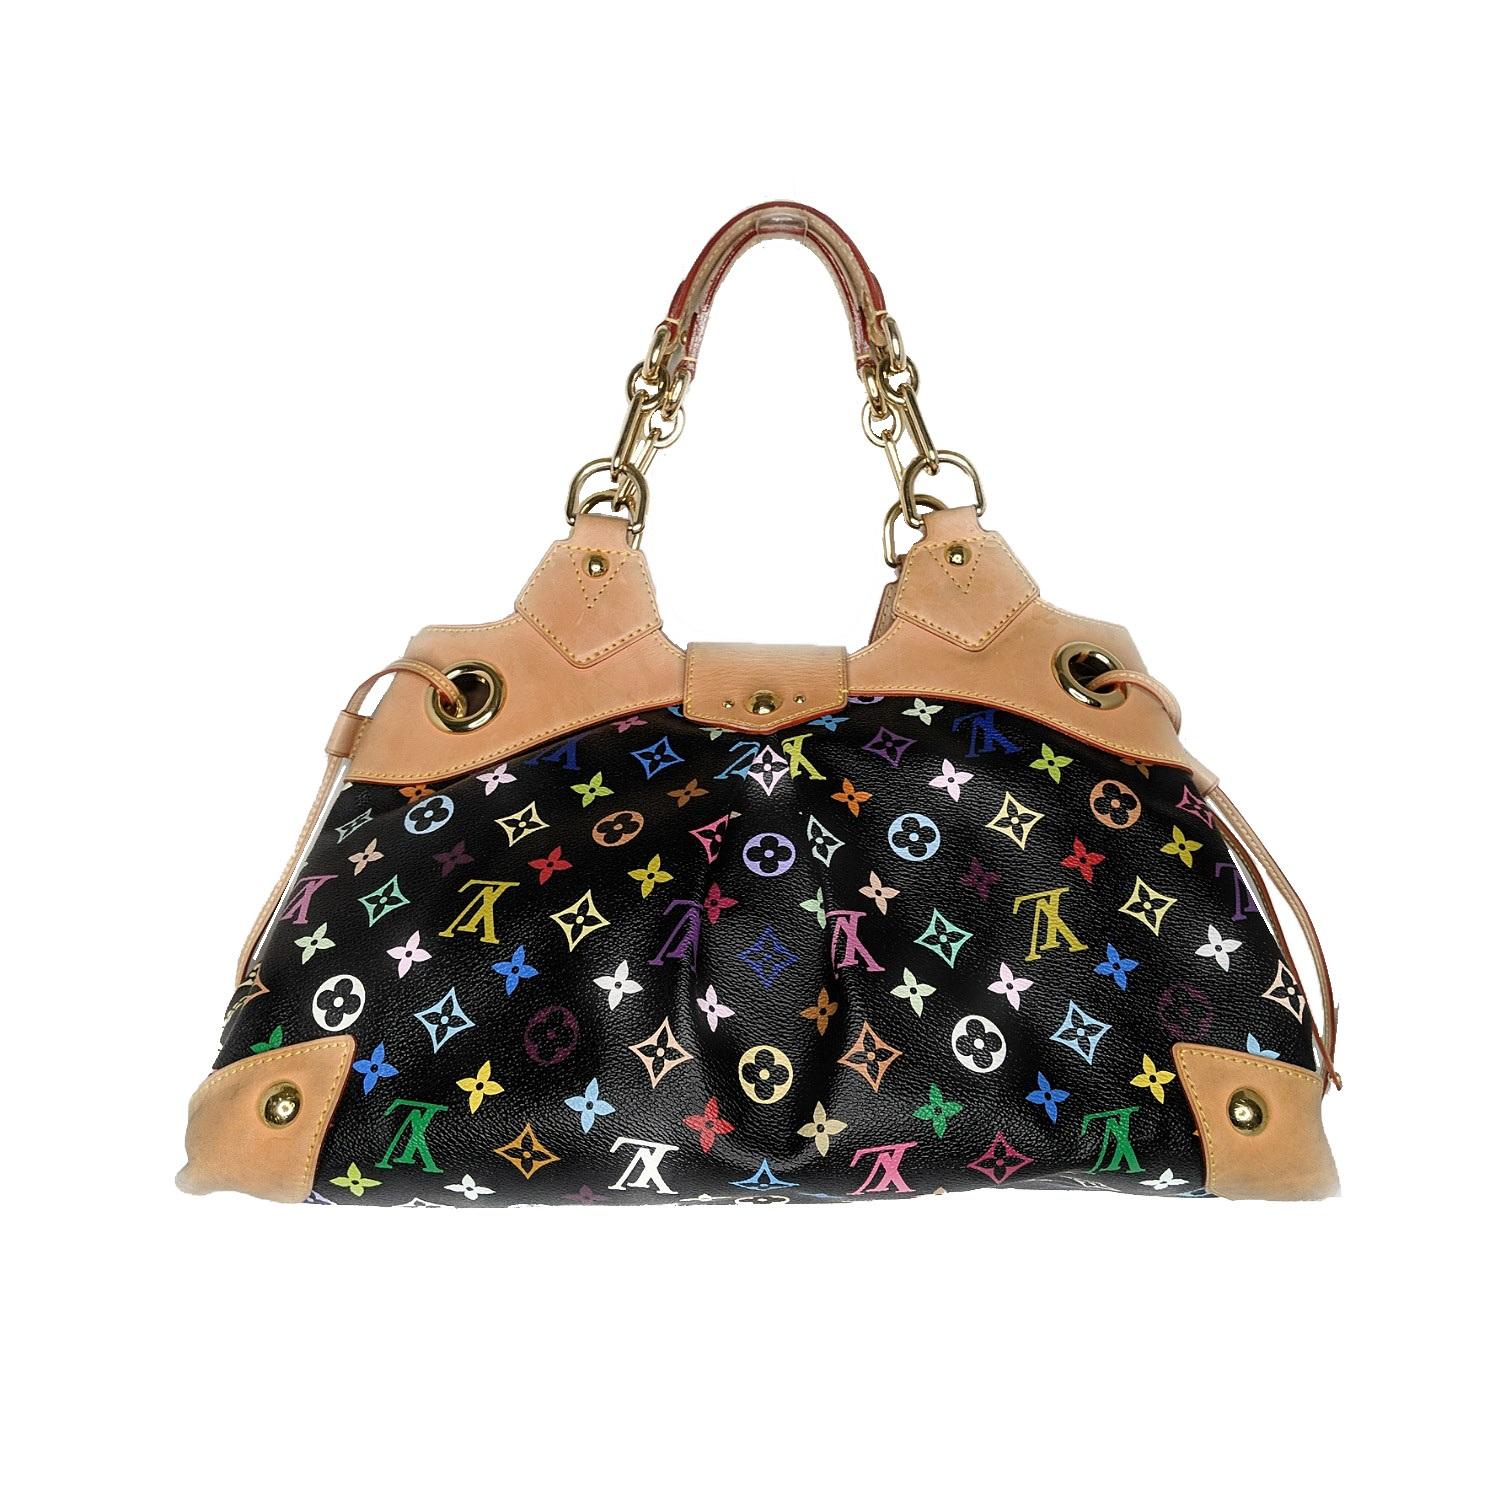 Black and multicolor monogram Louis Vuitton Ursula shoulder bag with gold-tone hardware, dual chain-link shoulder straps with leather shoulder guards, tan Vachetta leather trim, dual drawstring accents at sides, dual interior compartments, Alcantara